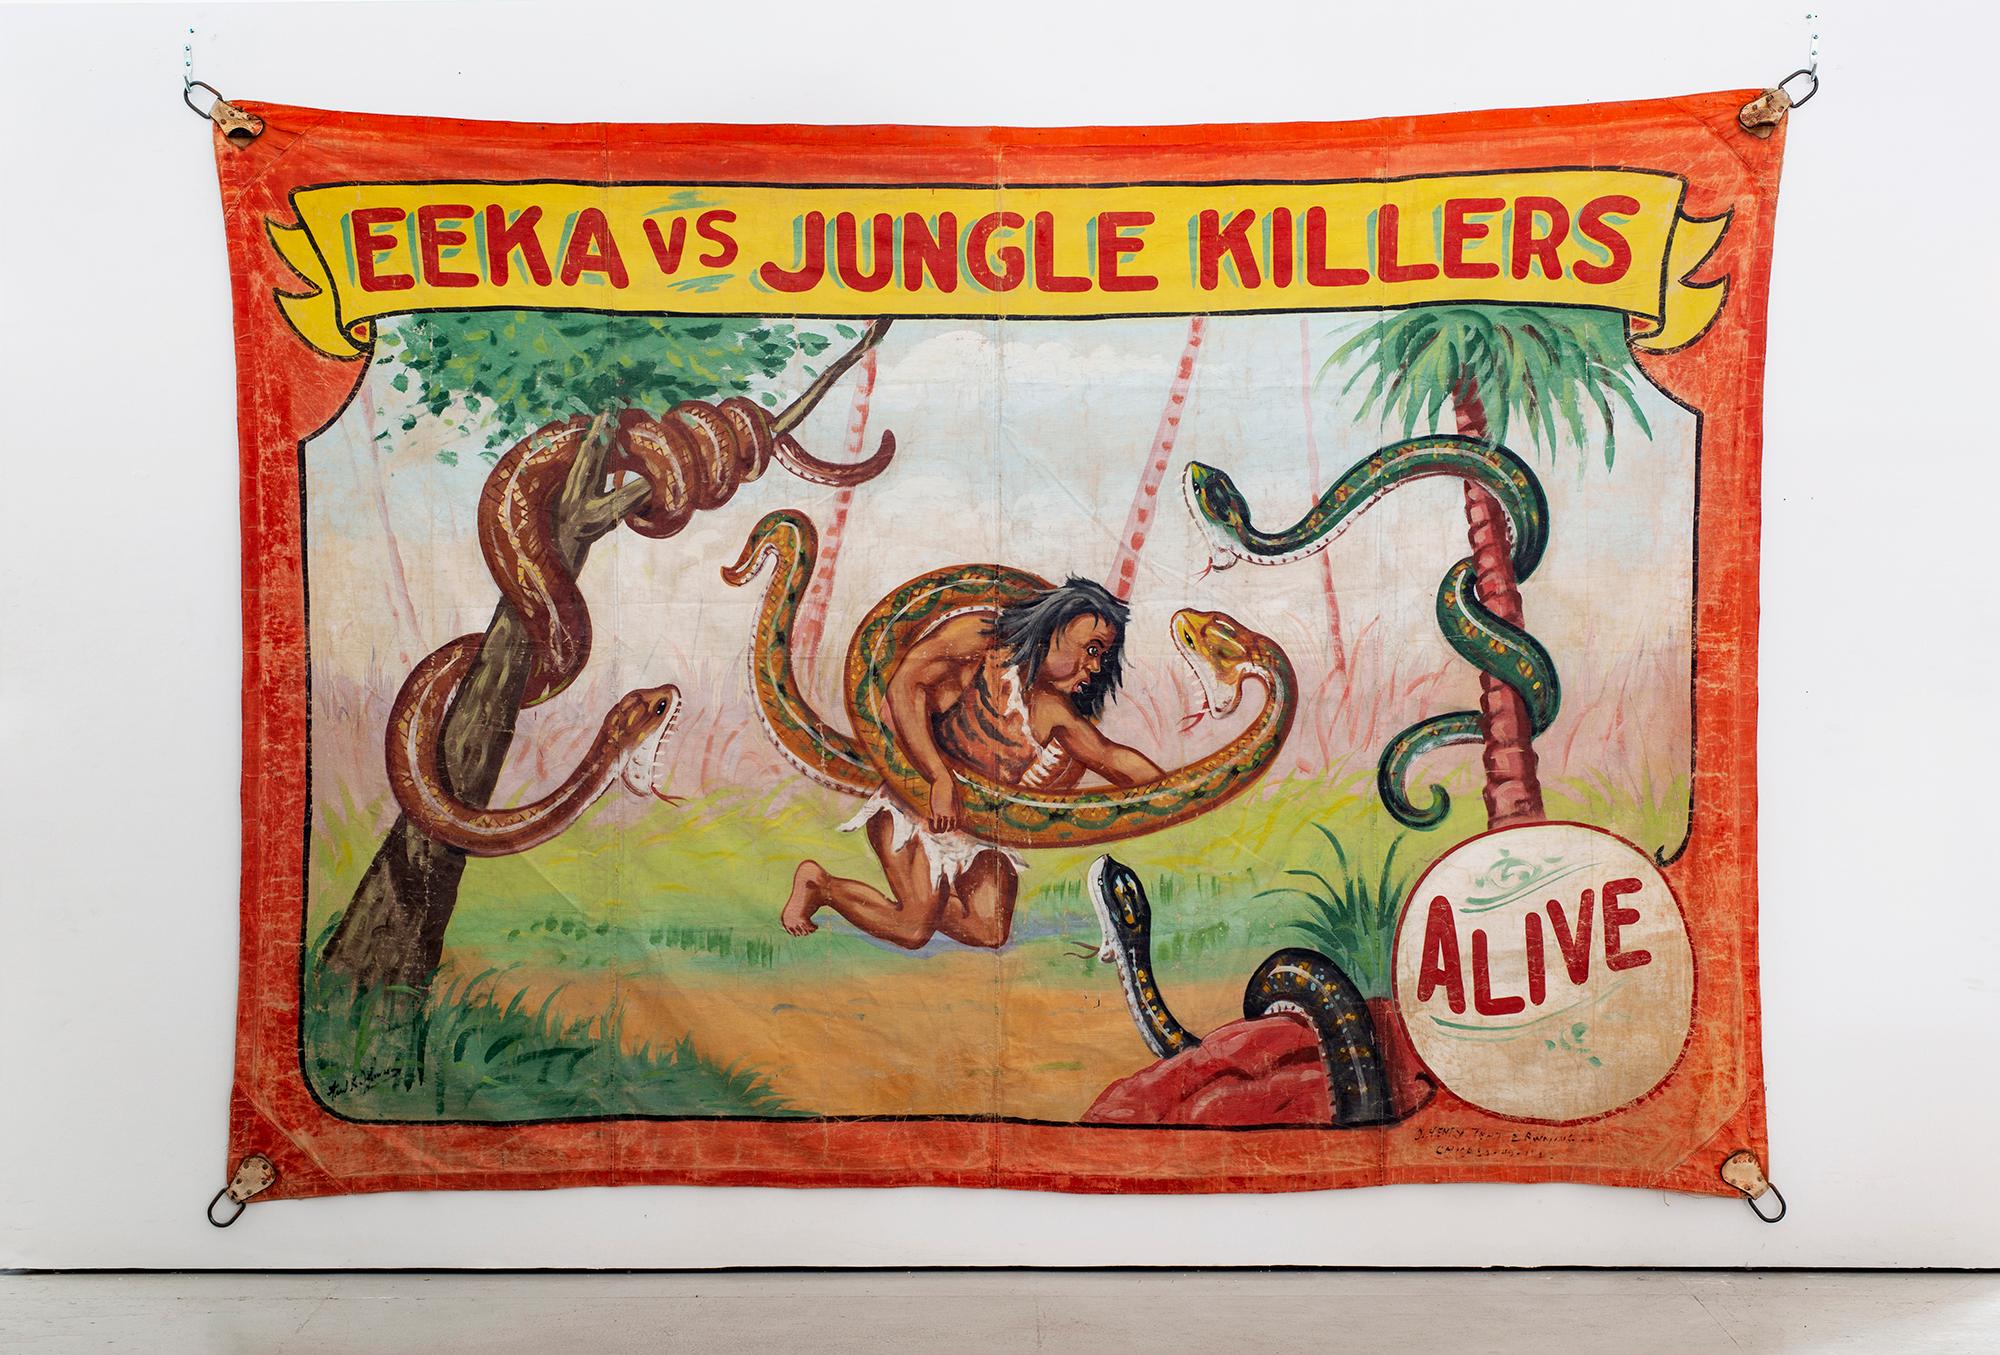 Gigantic Side Show Banner from 1940s Circus - 
